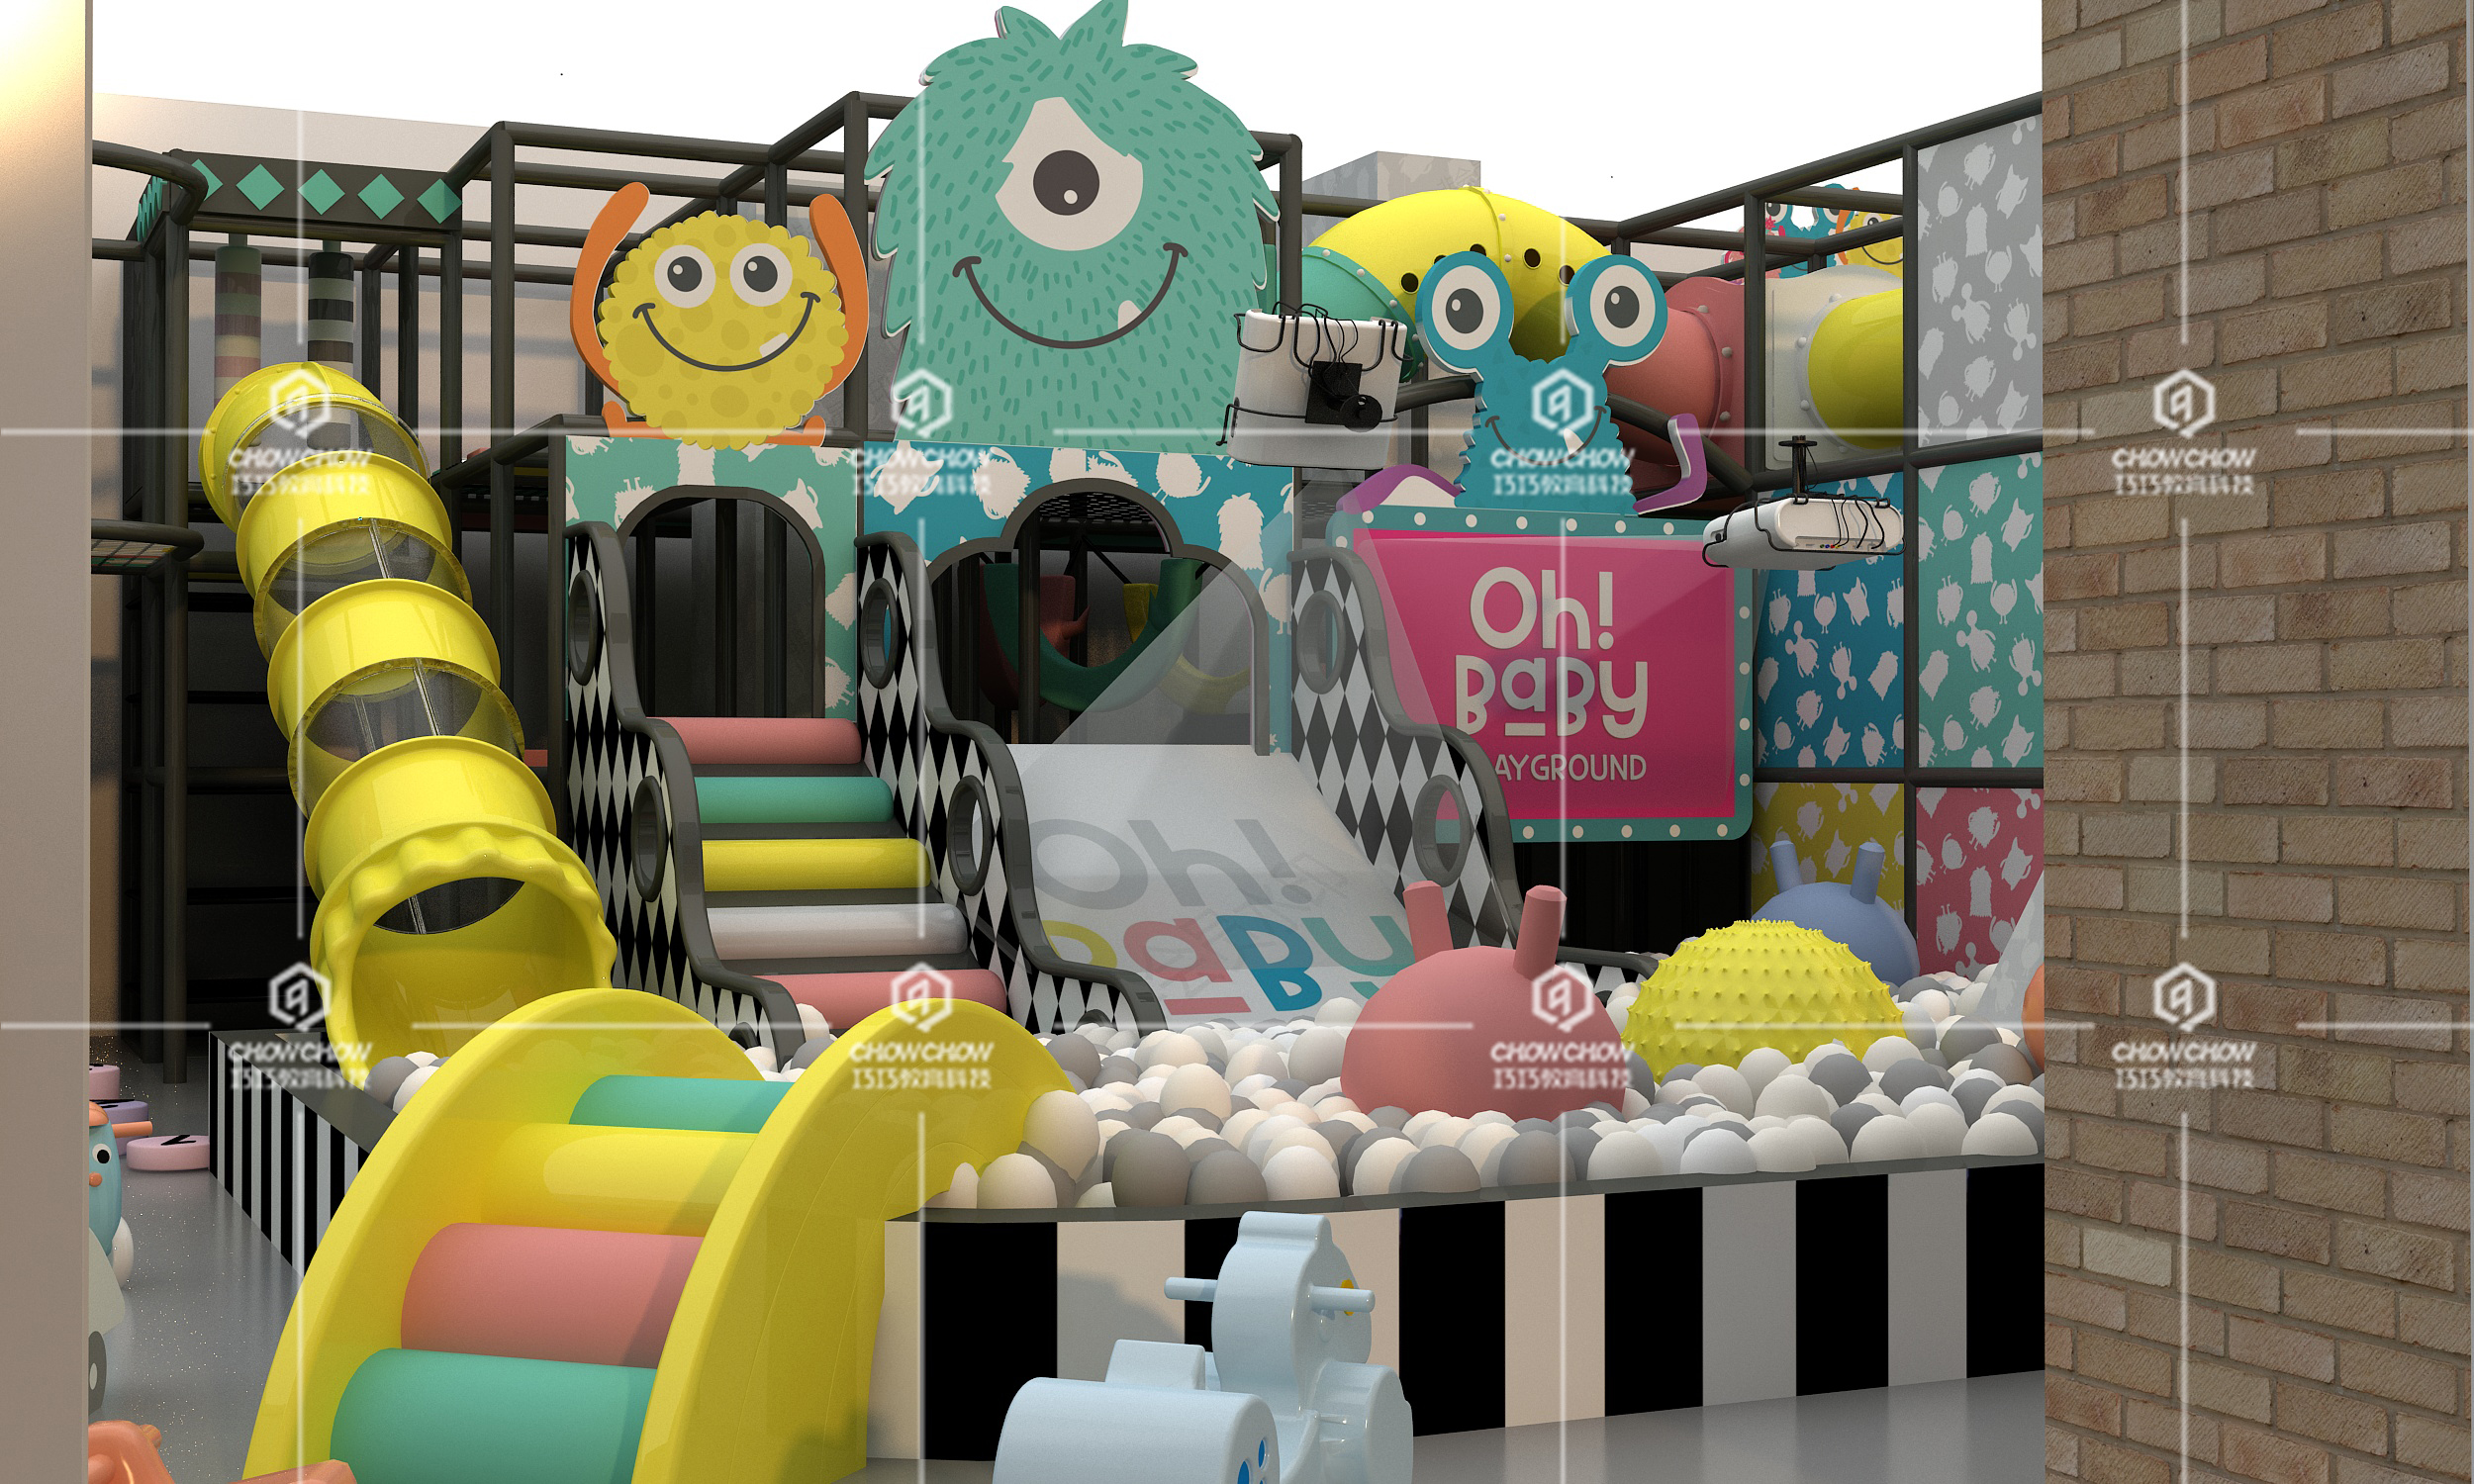 What kind of indoor playground equipment can attract customers4